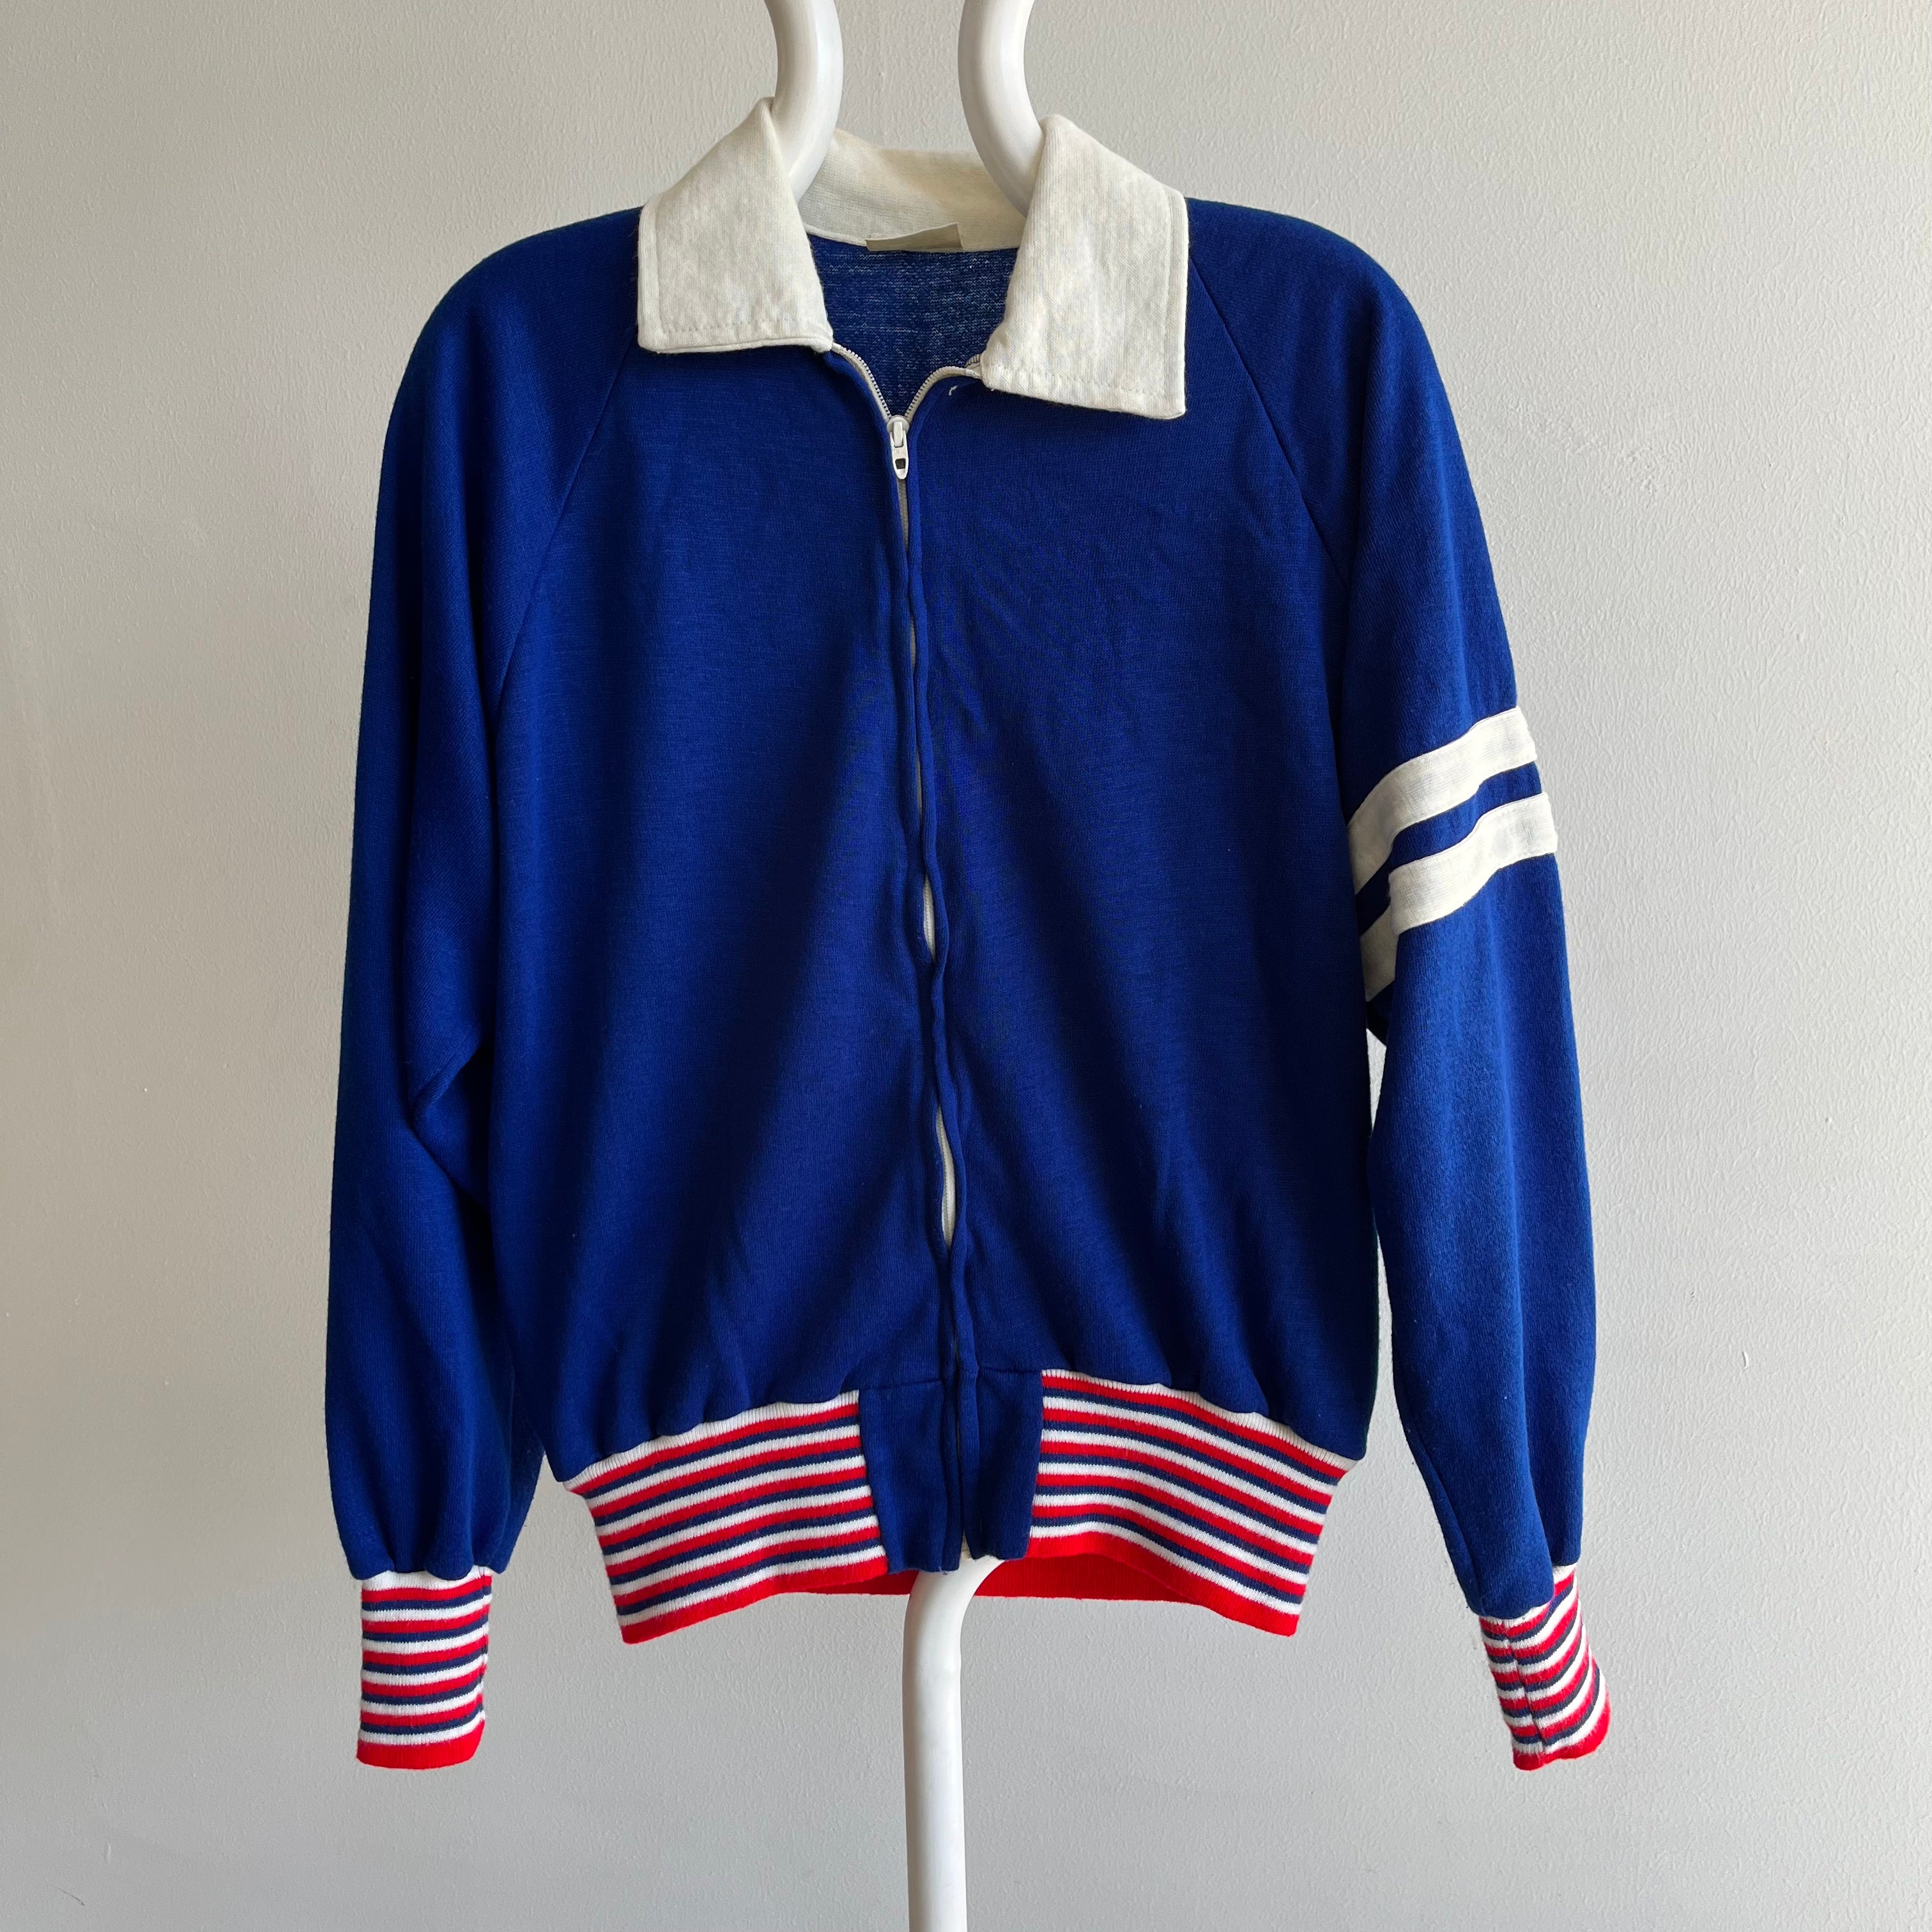 GG 1970s Kings Road by Sears Super Rad/Soft Collared Zip Up